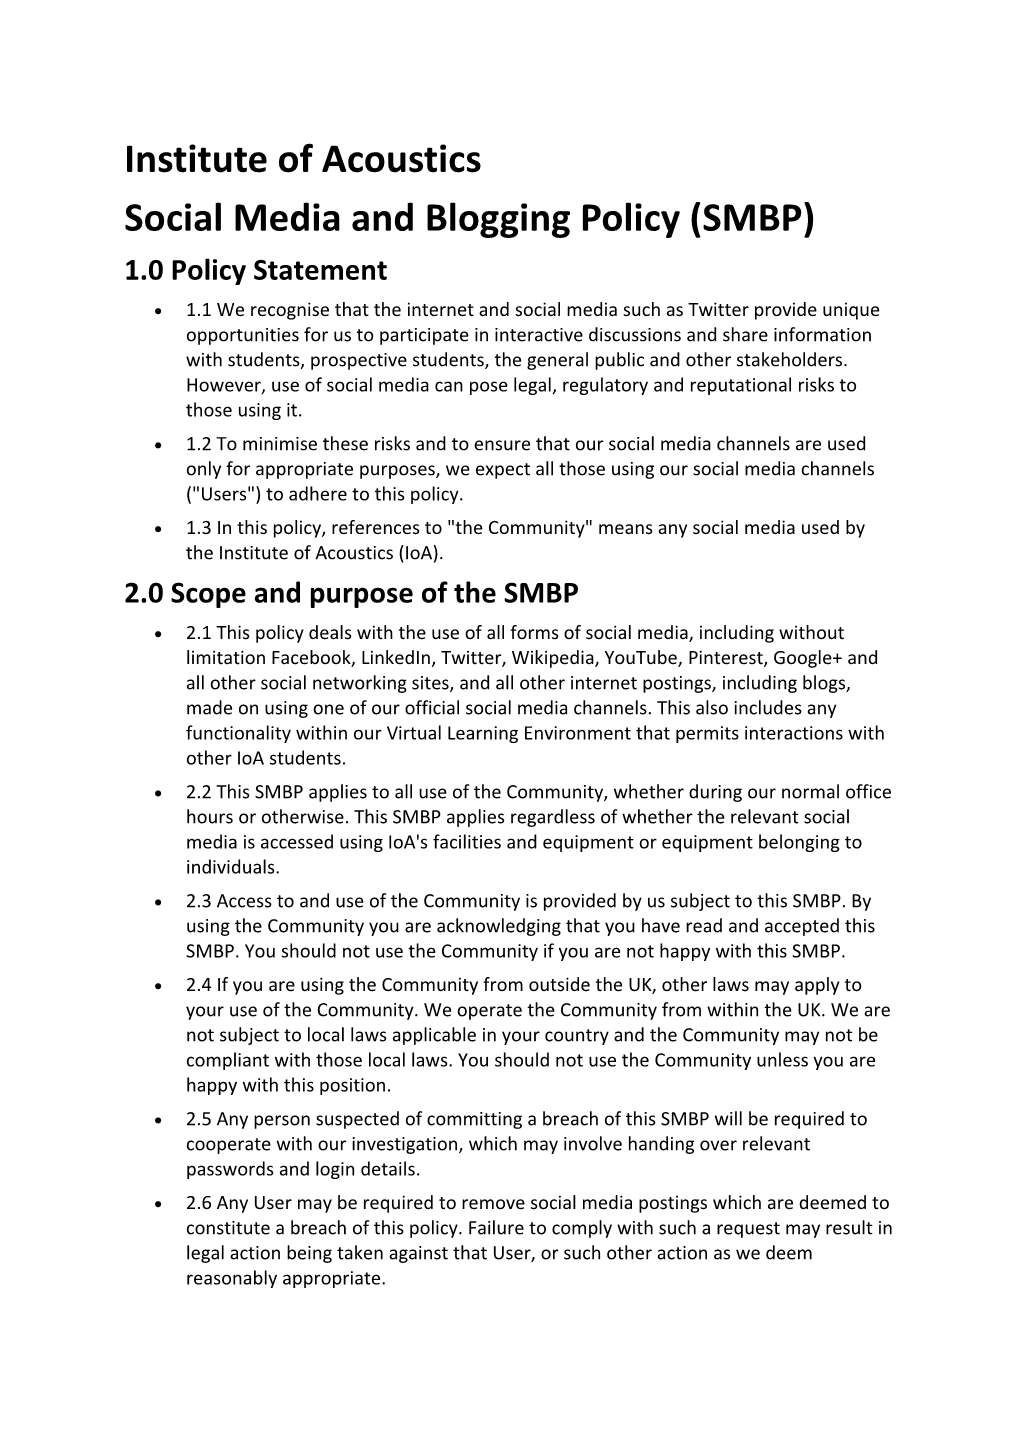 Social Media and Blogging Policy (SMBP)